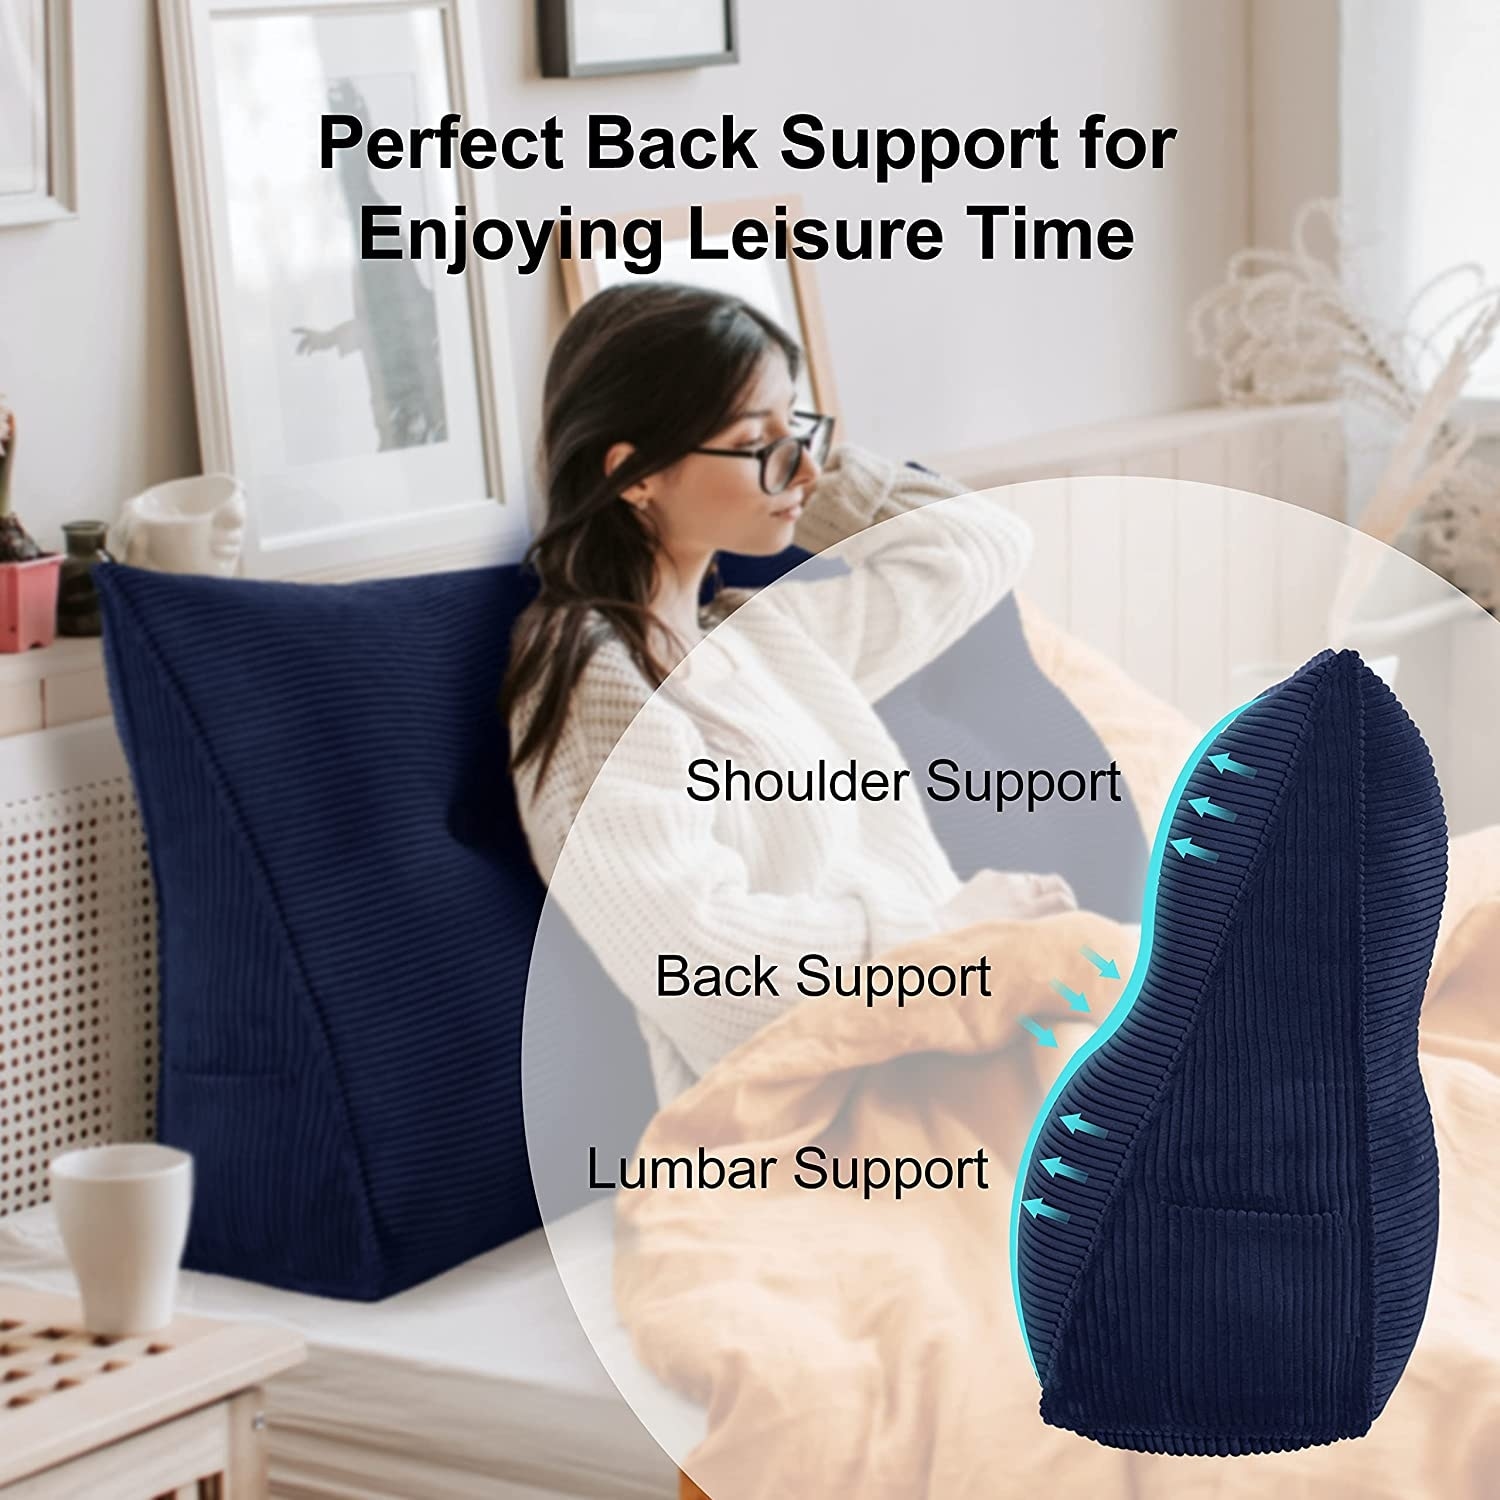 Bed Rest Reading Wedge Pillow Alternative Headboard Back Support - On Sale  - Bed Bath & Beyond - 34626699